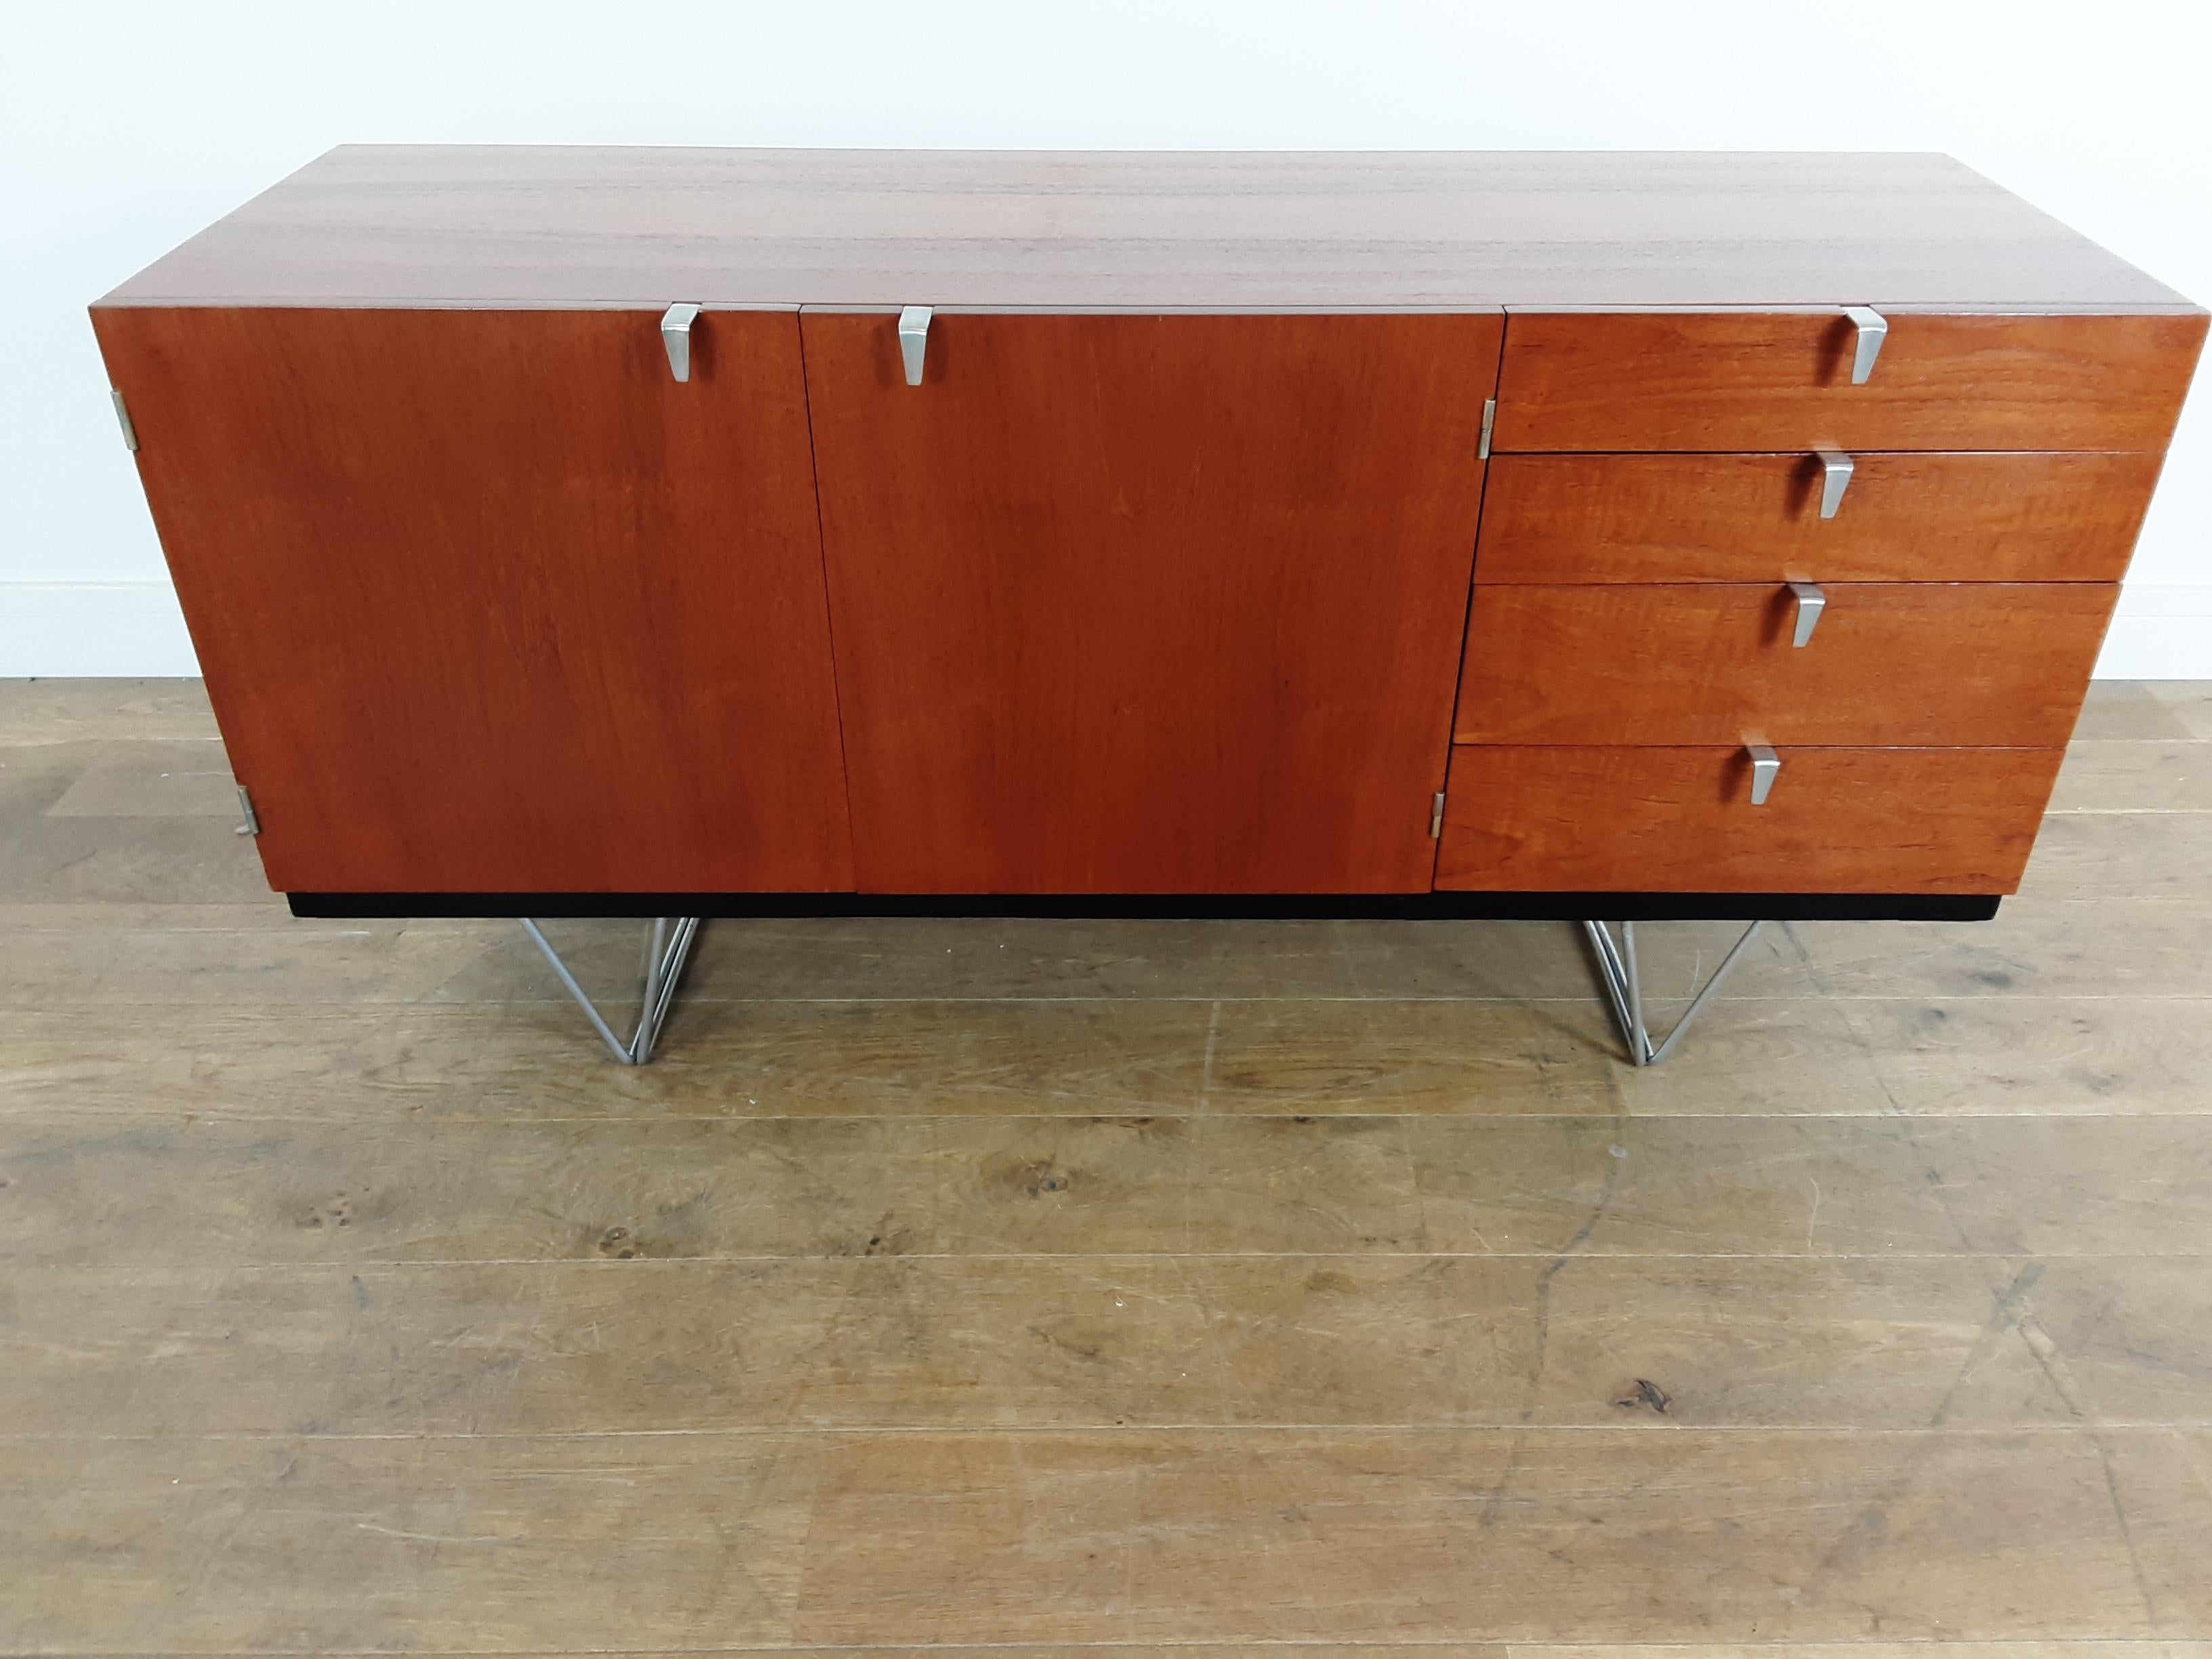 Mid-Century Modern design sideboard credenza
beautiful teak wood sideboard with contrasting beech interior and polished steel handles, raised on polished tubular legs.
Stag Furniture badge attached.
Designed by John and Sylvia Reid
s range